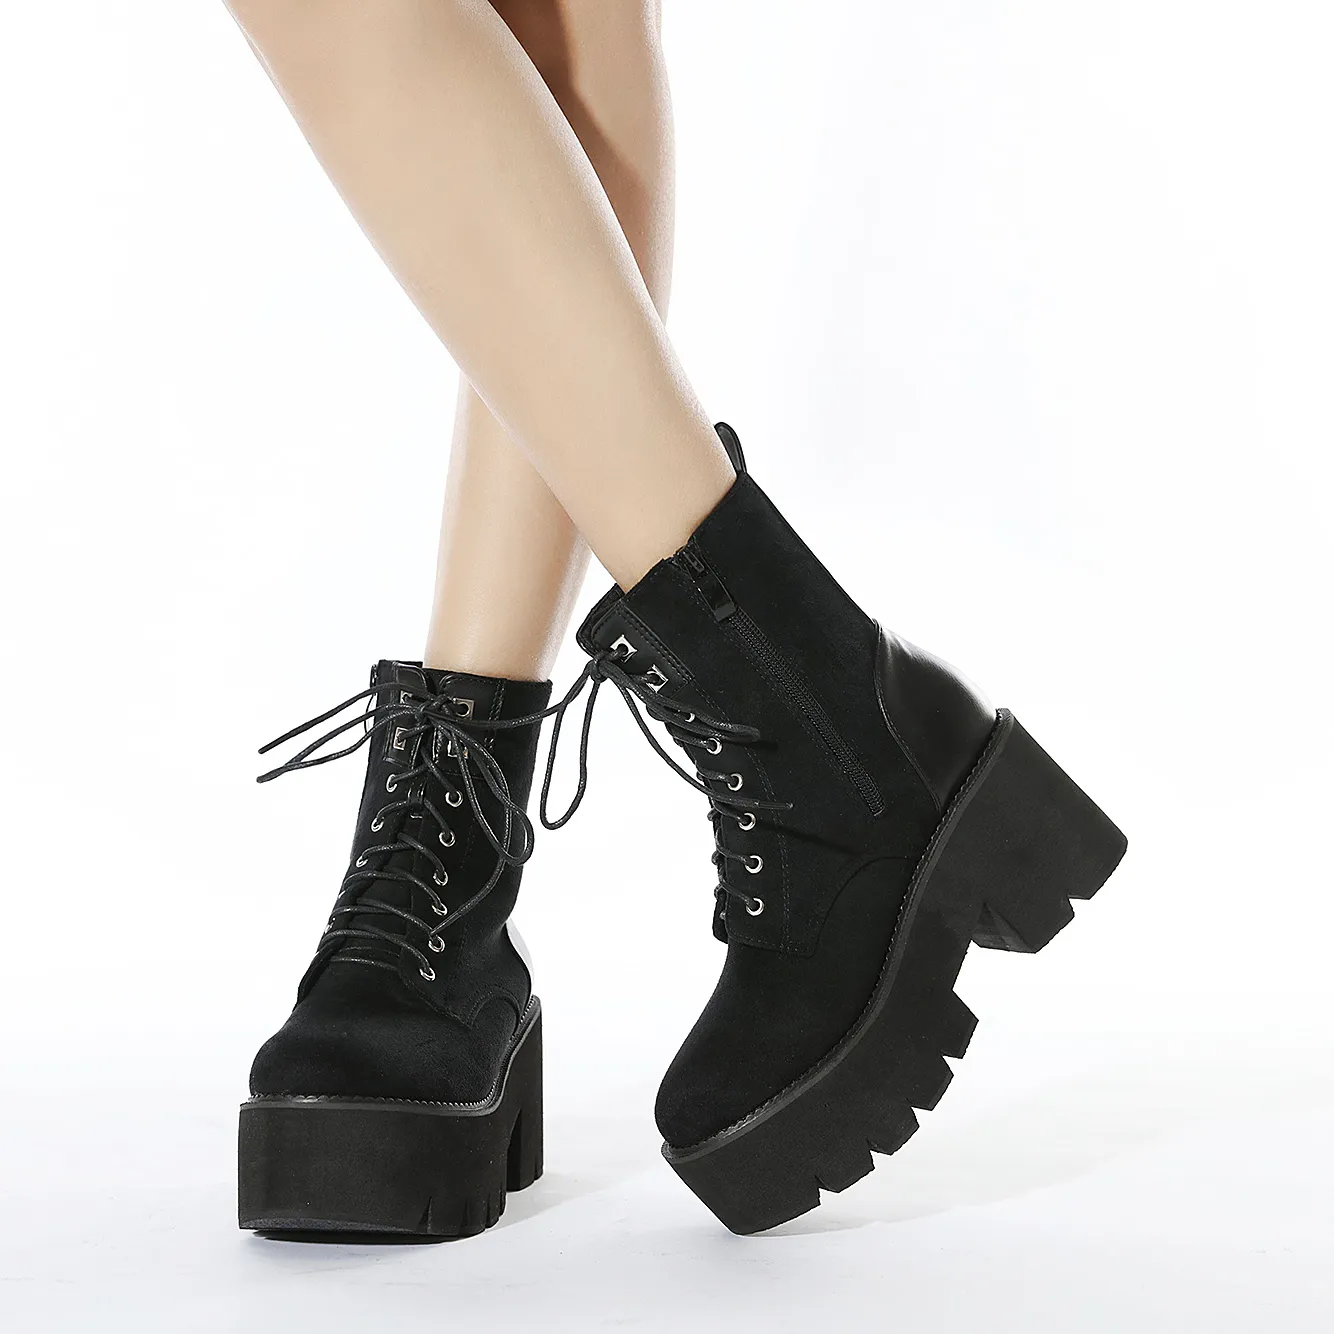 New arrival zipper boots women shoes fashion designs laces up thick 8 cm chunky heels black faux suede ankle boots ladies